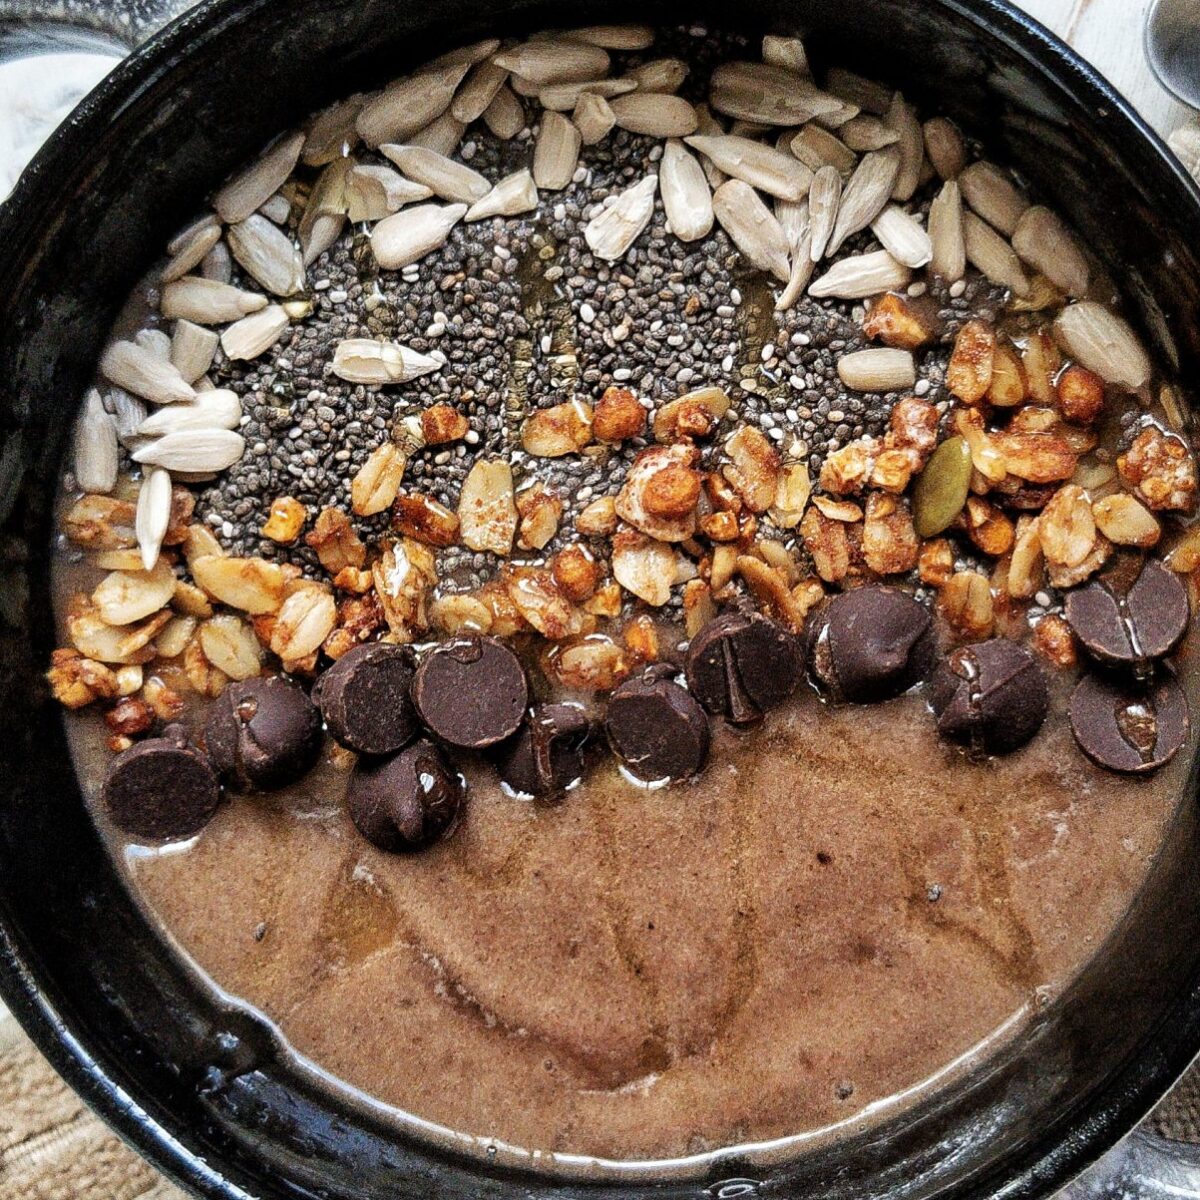 Coffee banana smoothie bowl topped with chia seeds, sunflower seeds, granola, chocolate chips, drizzle of honey